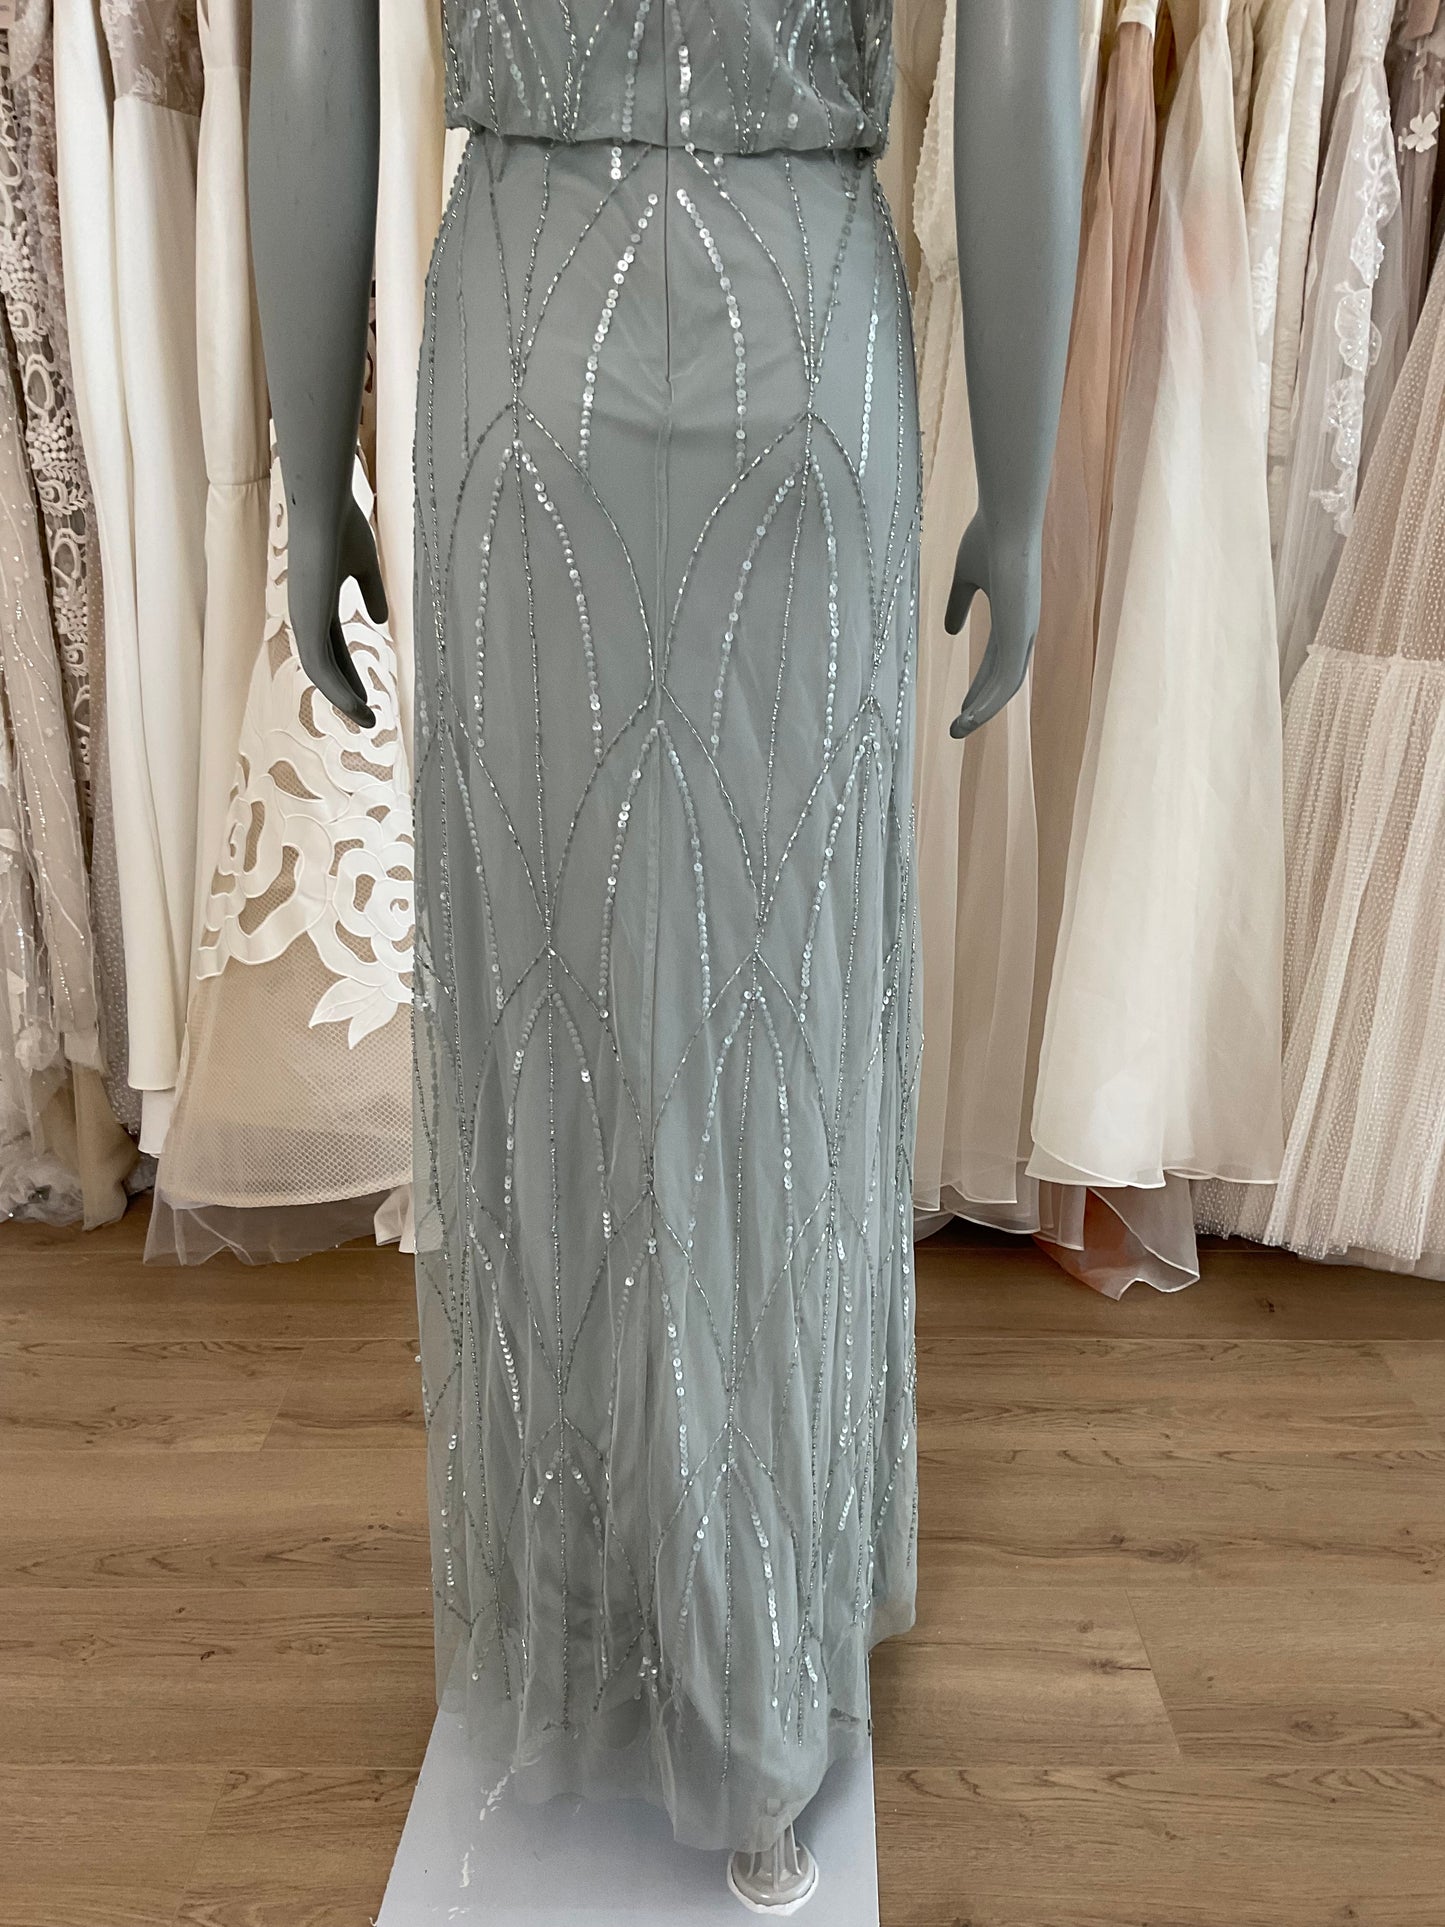 Adrianna Papell Dusty Pale Blue Beaded Gown